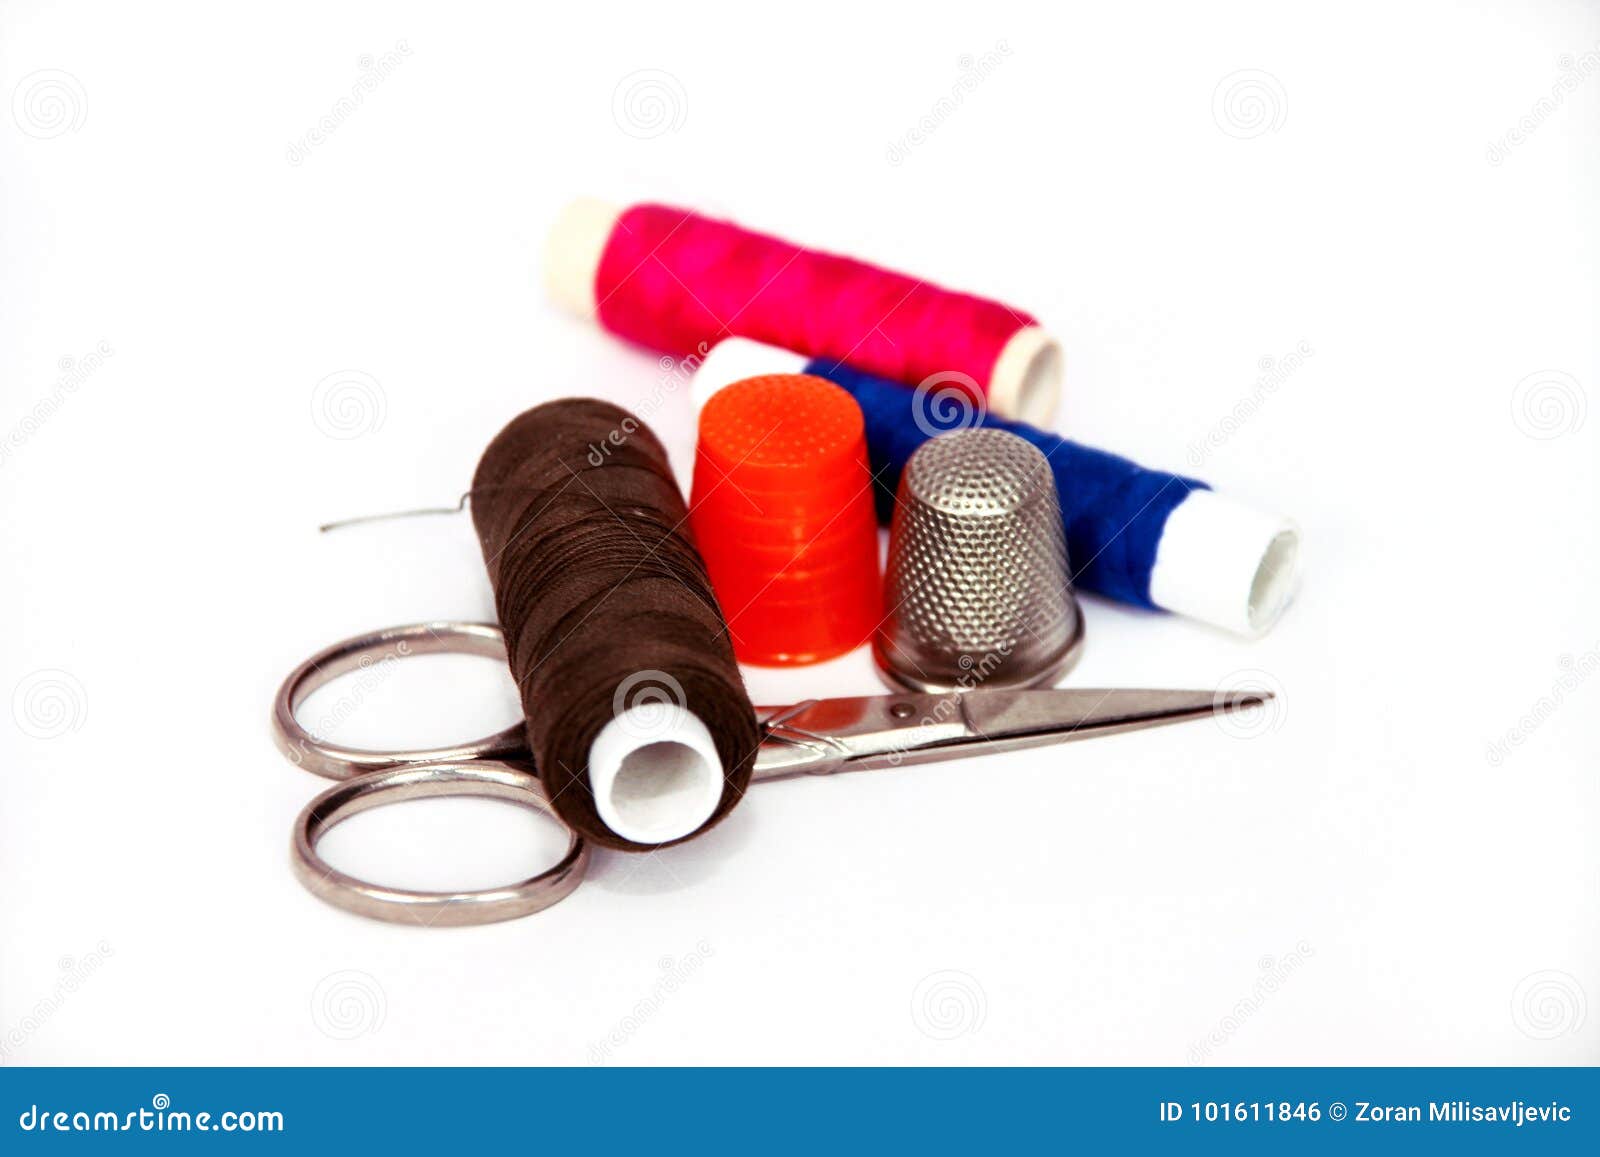 Sewing kit stock photo. Image of repair, isolated, fashion - 101611846